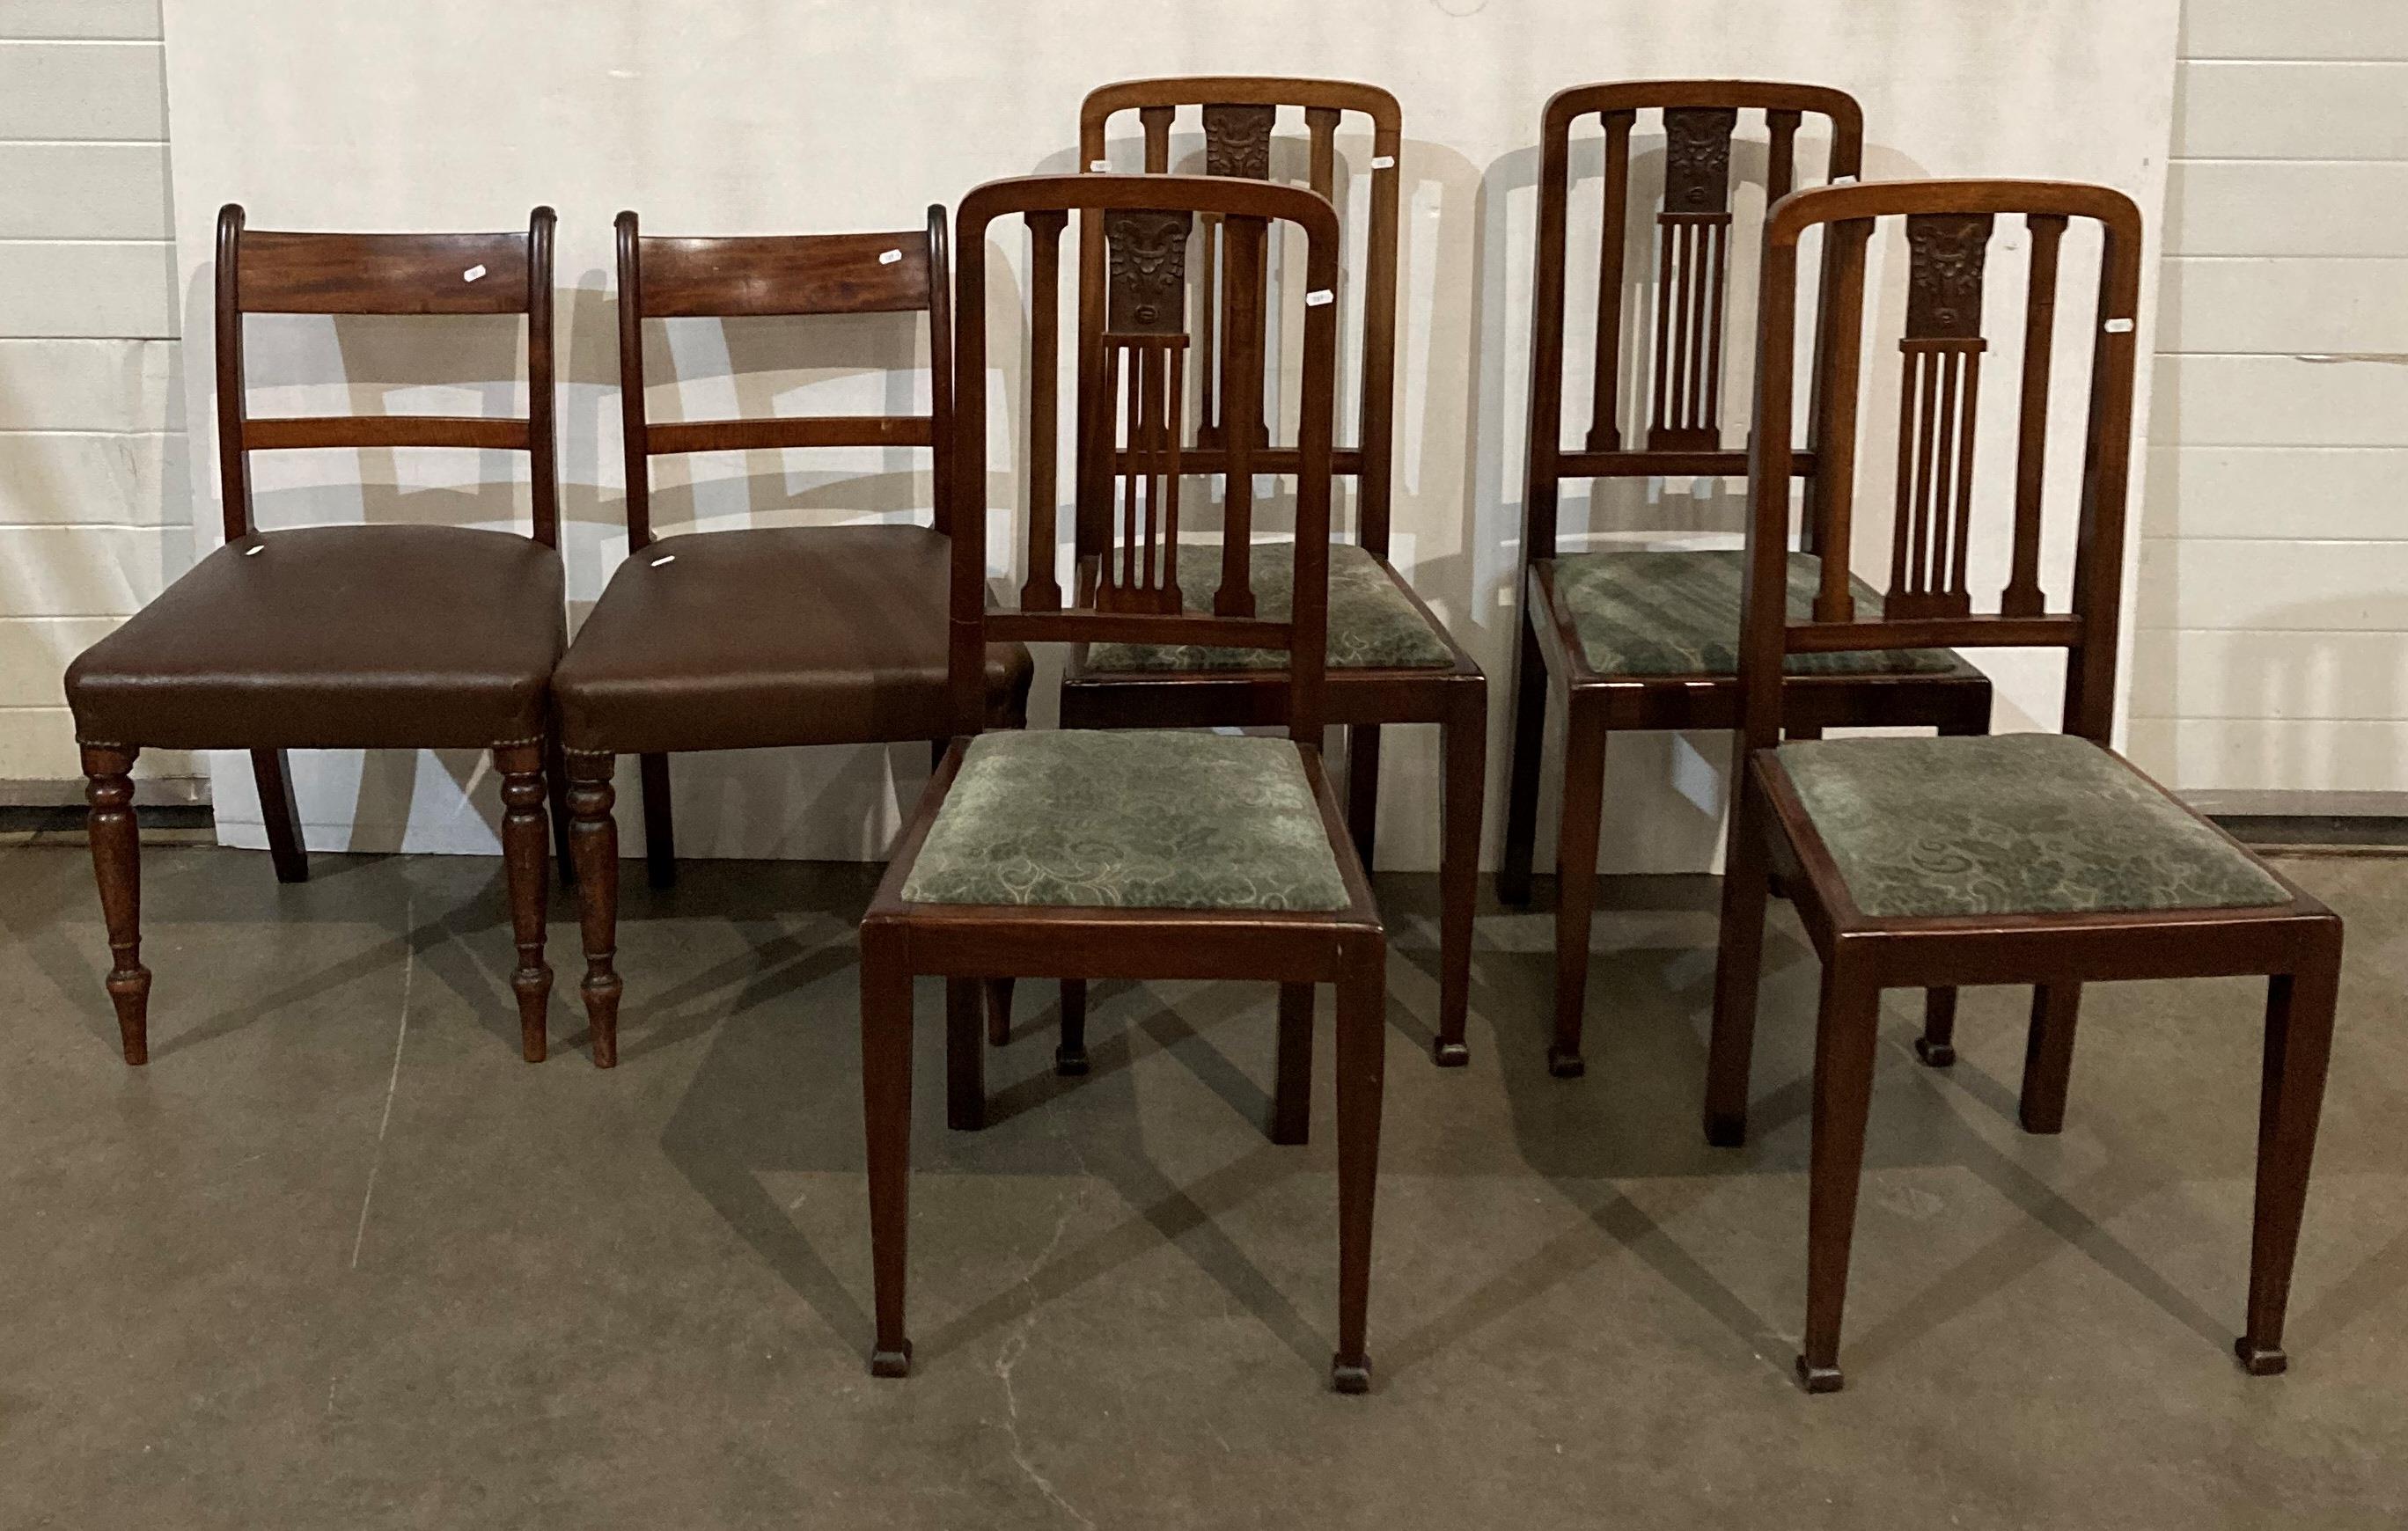 Set of four mahogany rail-back dining chairs with carved central details and a pair of mahogany